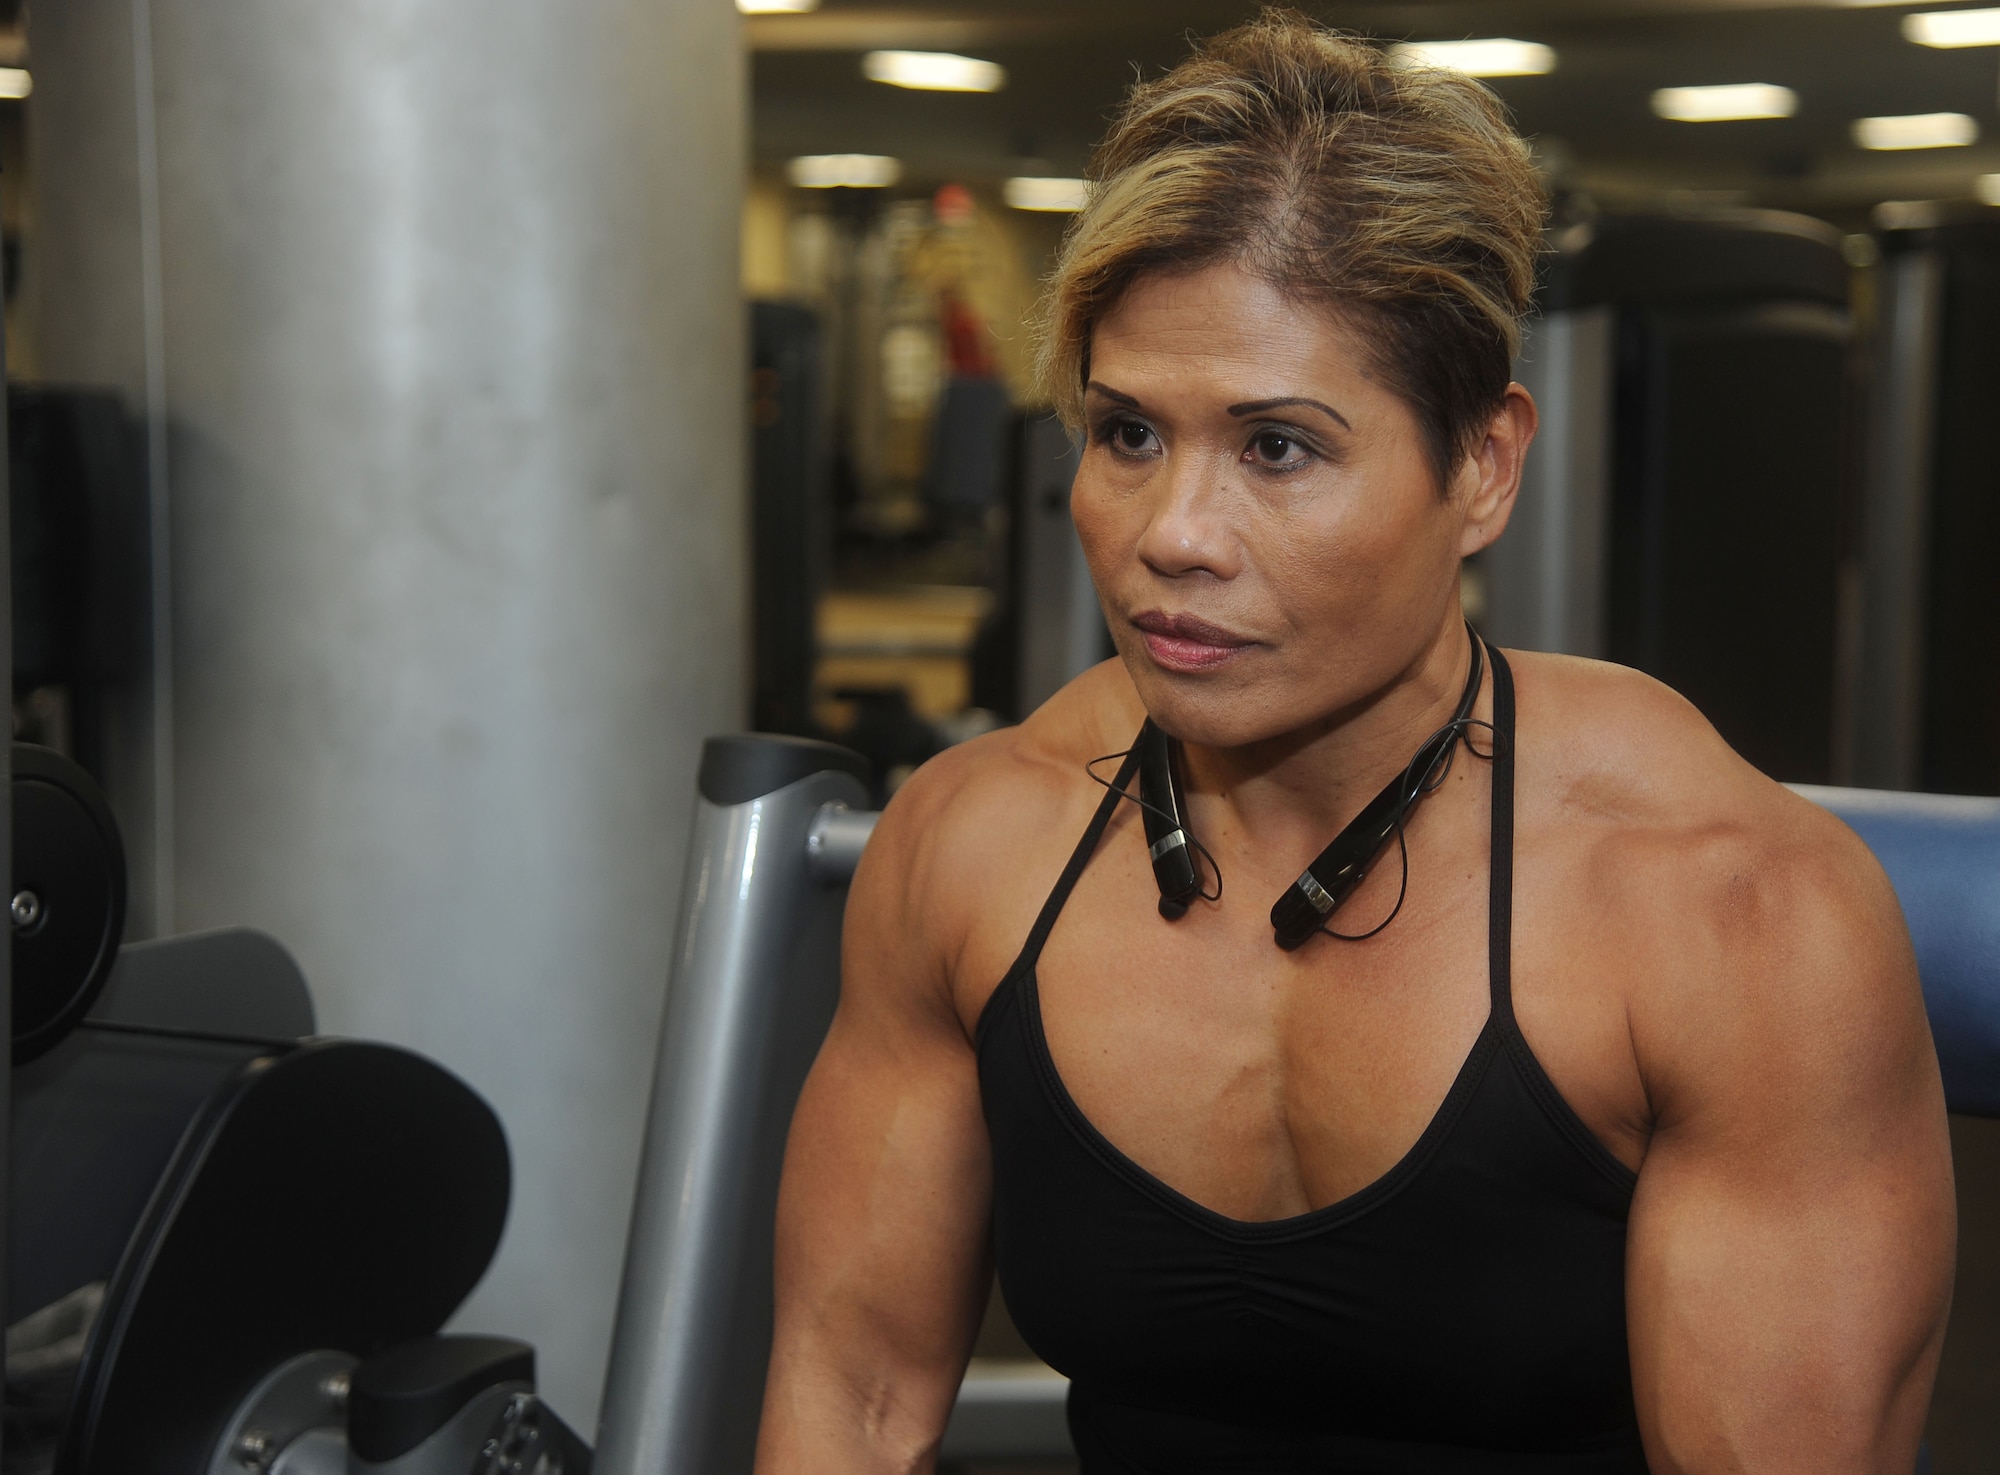 Maria Flores, a retired U.S. Army sergeant first class, uses a shoulder press machine during her workout at MacDill Air Force Base, Fla., Dec. 8, 2016. Flores, who is an award-winning bodybuilder, competed in the 2016 National Physique Committee United States Nationals for bodybuilding where she won the over 40, 45 and 50 age categories. (U.S. Air Force photo by Airman 1st Class Adam R. Shanks)